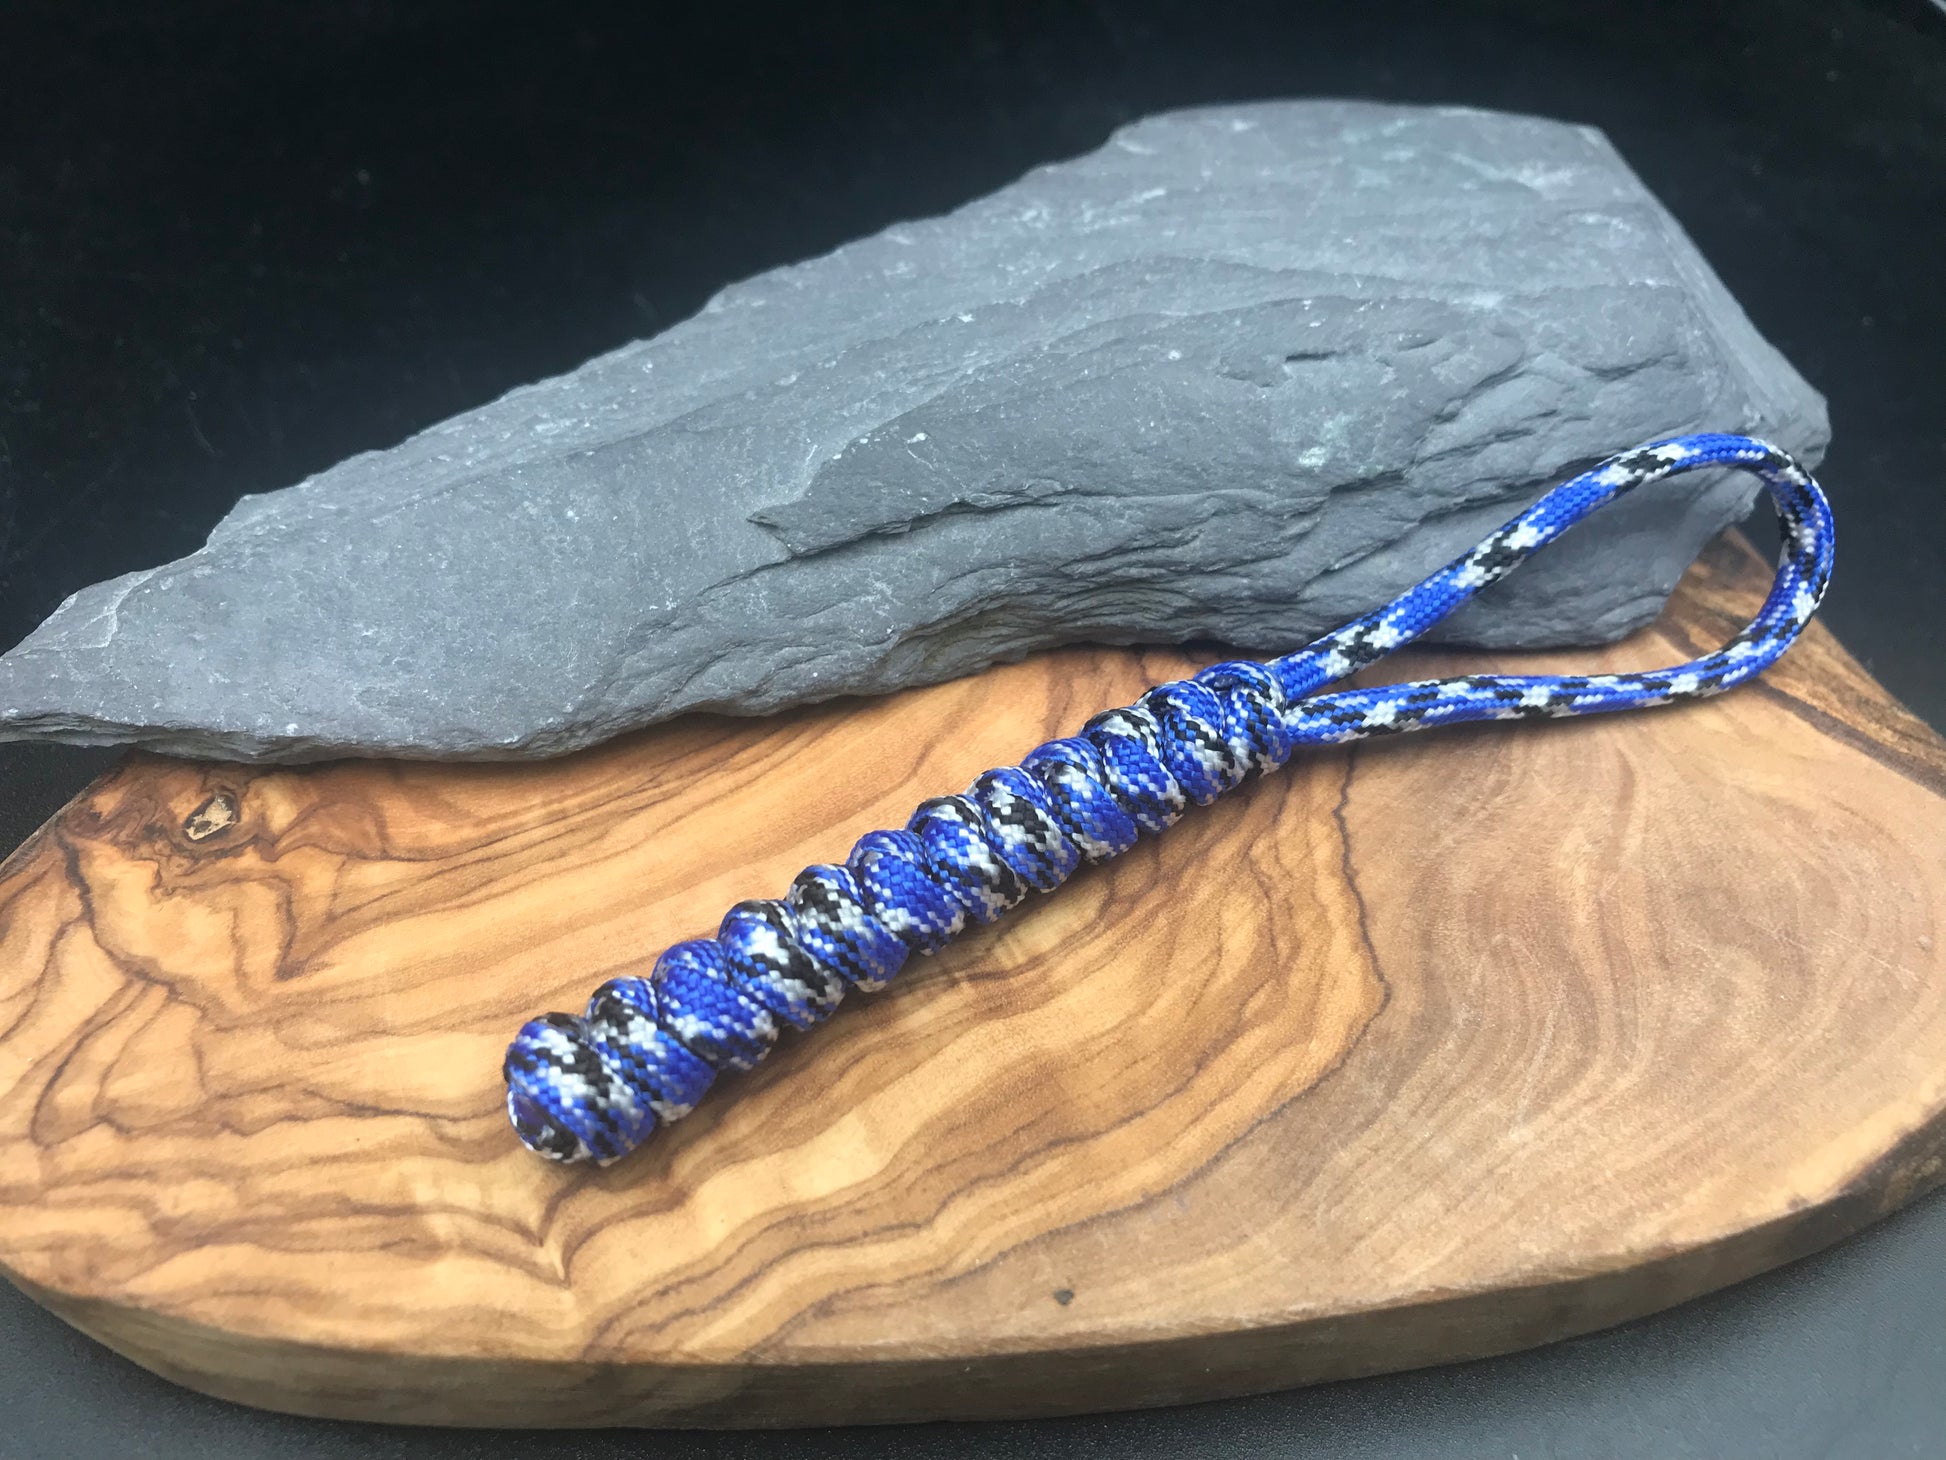 Hand made Paracord lanyard in blue white and black coloured mix snake knot design